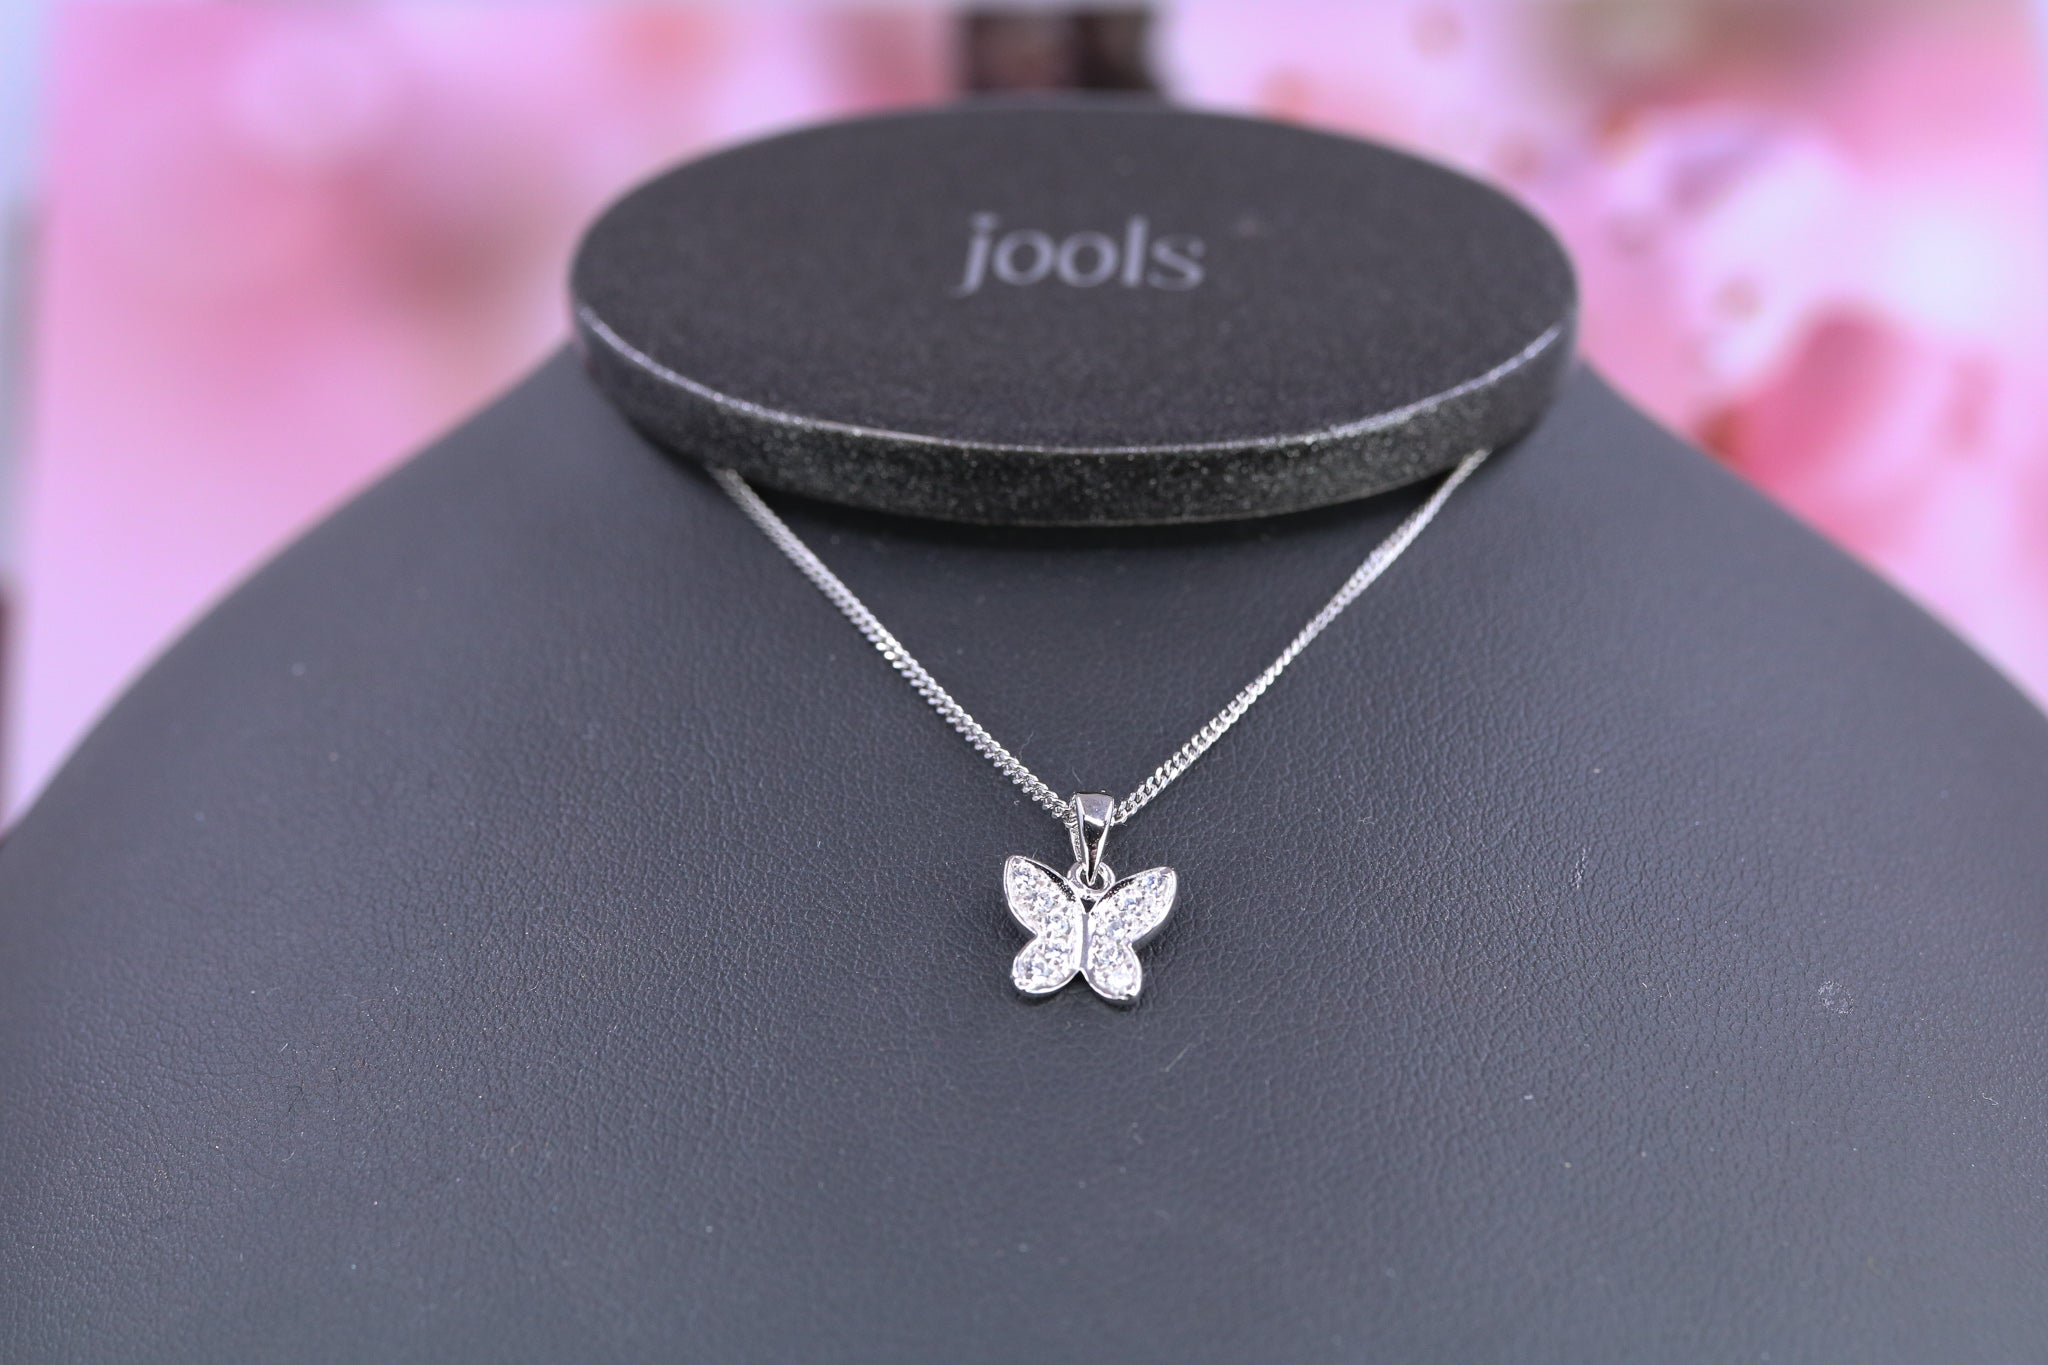 Jools Sterling Silver Pendant & Chain - JL1001 - Hallmark Jewellers Formby & The Jewellers Bench Widnes